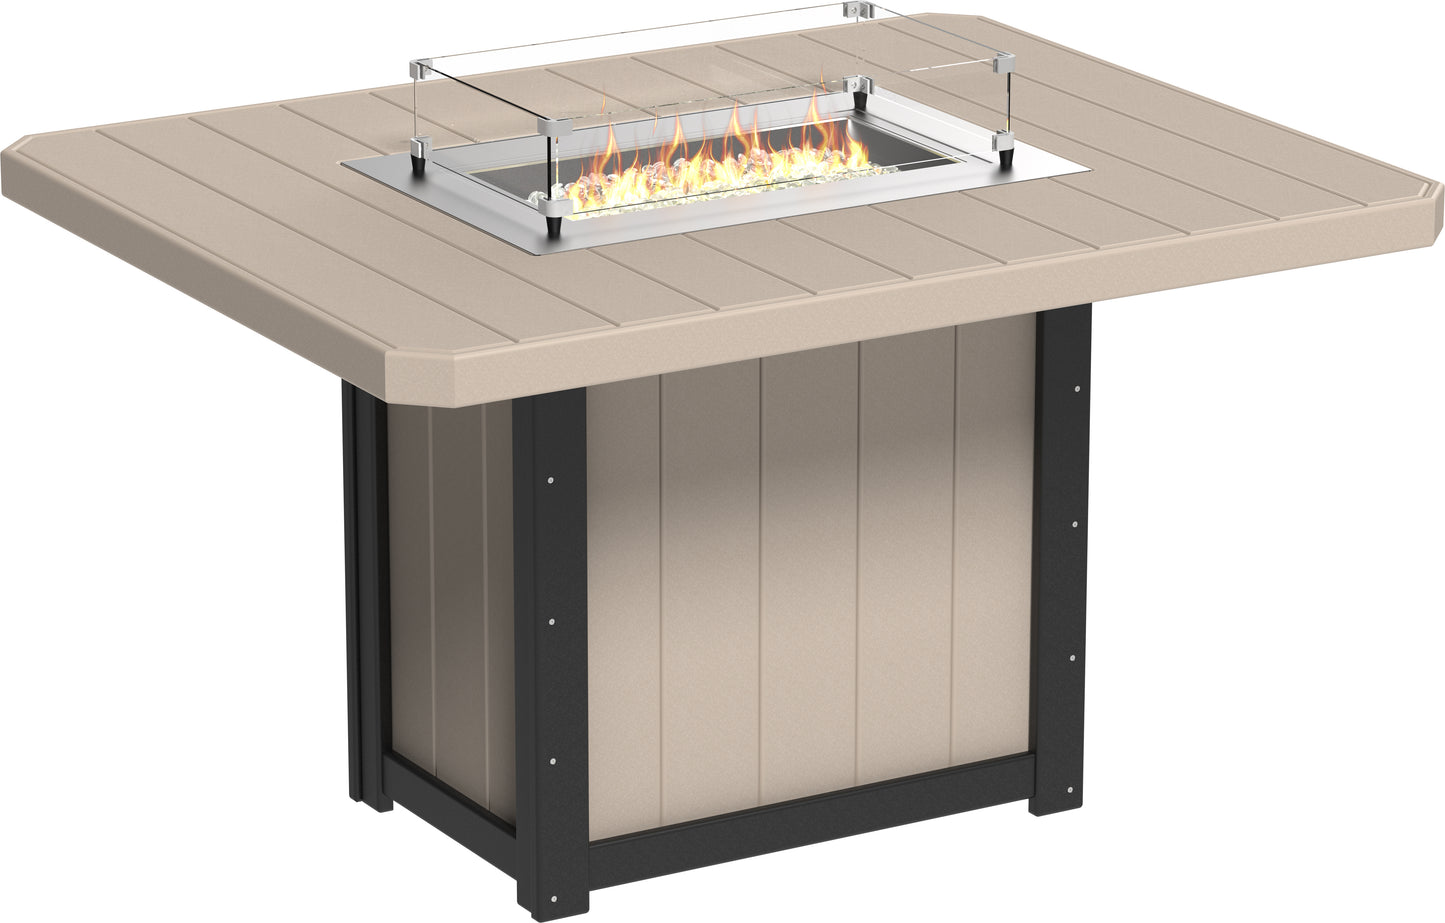 LuxCraft Recycled Plastic Lumin 62" Rectangular Fire Table (COUNTER HEIGHT) - LEAD TIME TO SHIP 3 TO 4 WEEKS